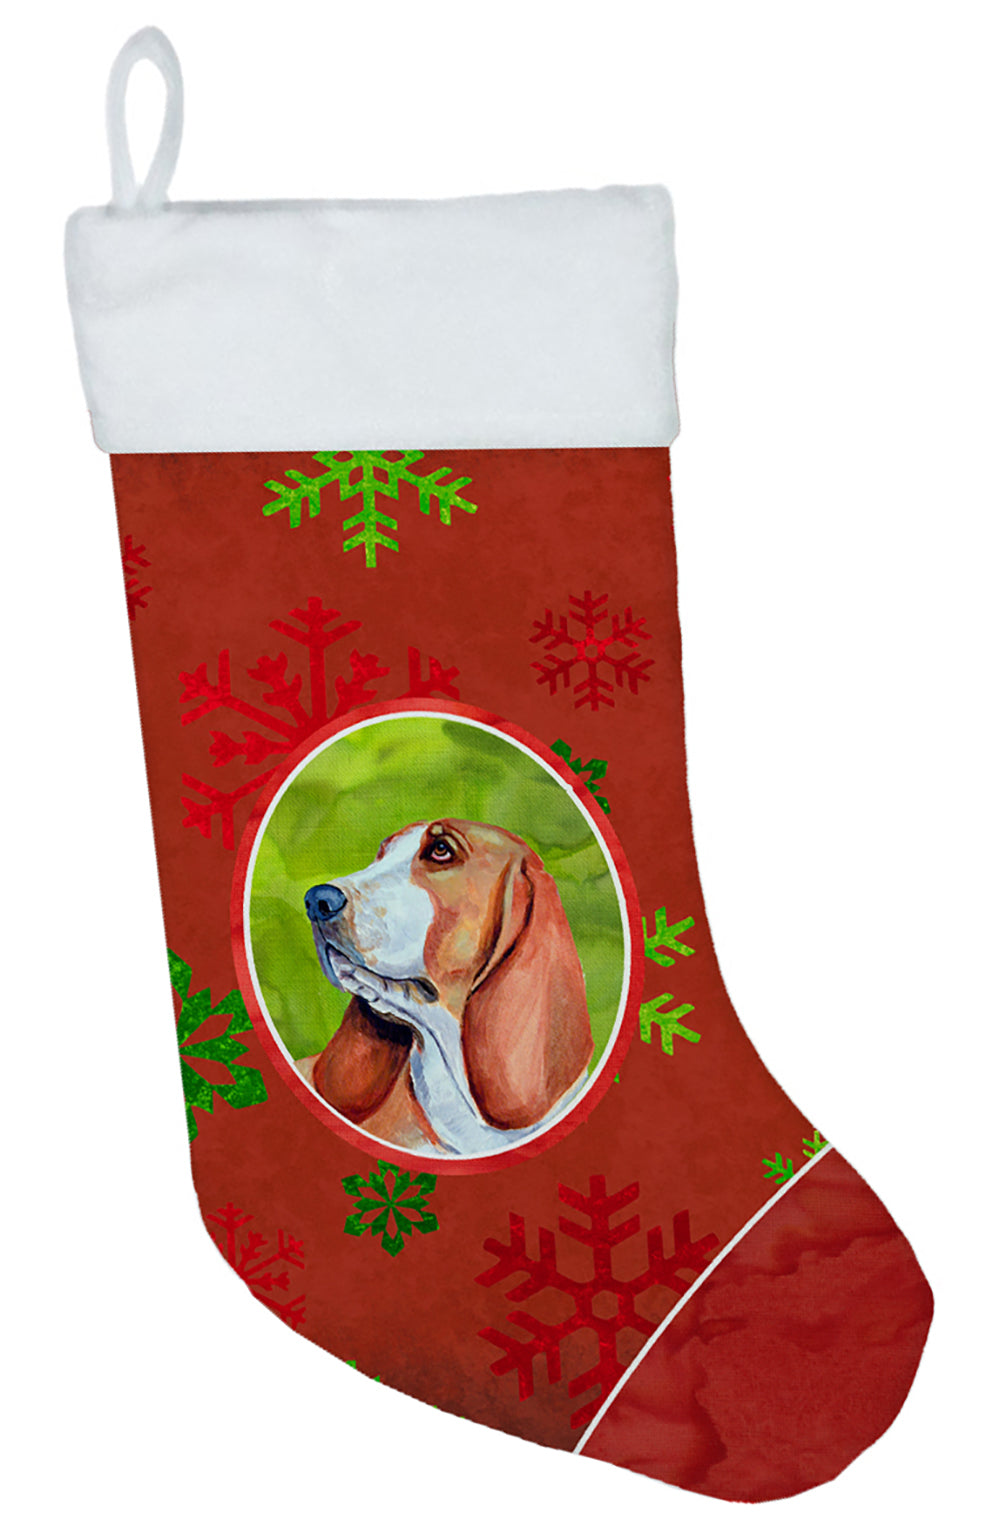 Basset Hound Red and Green Snowflakes Holiday Christmas Christmas Stocking